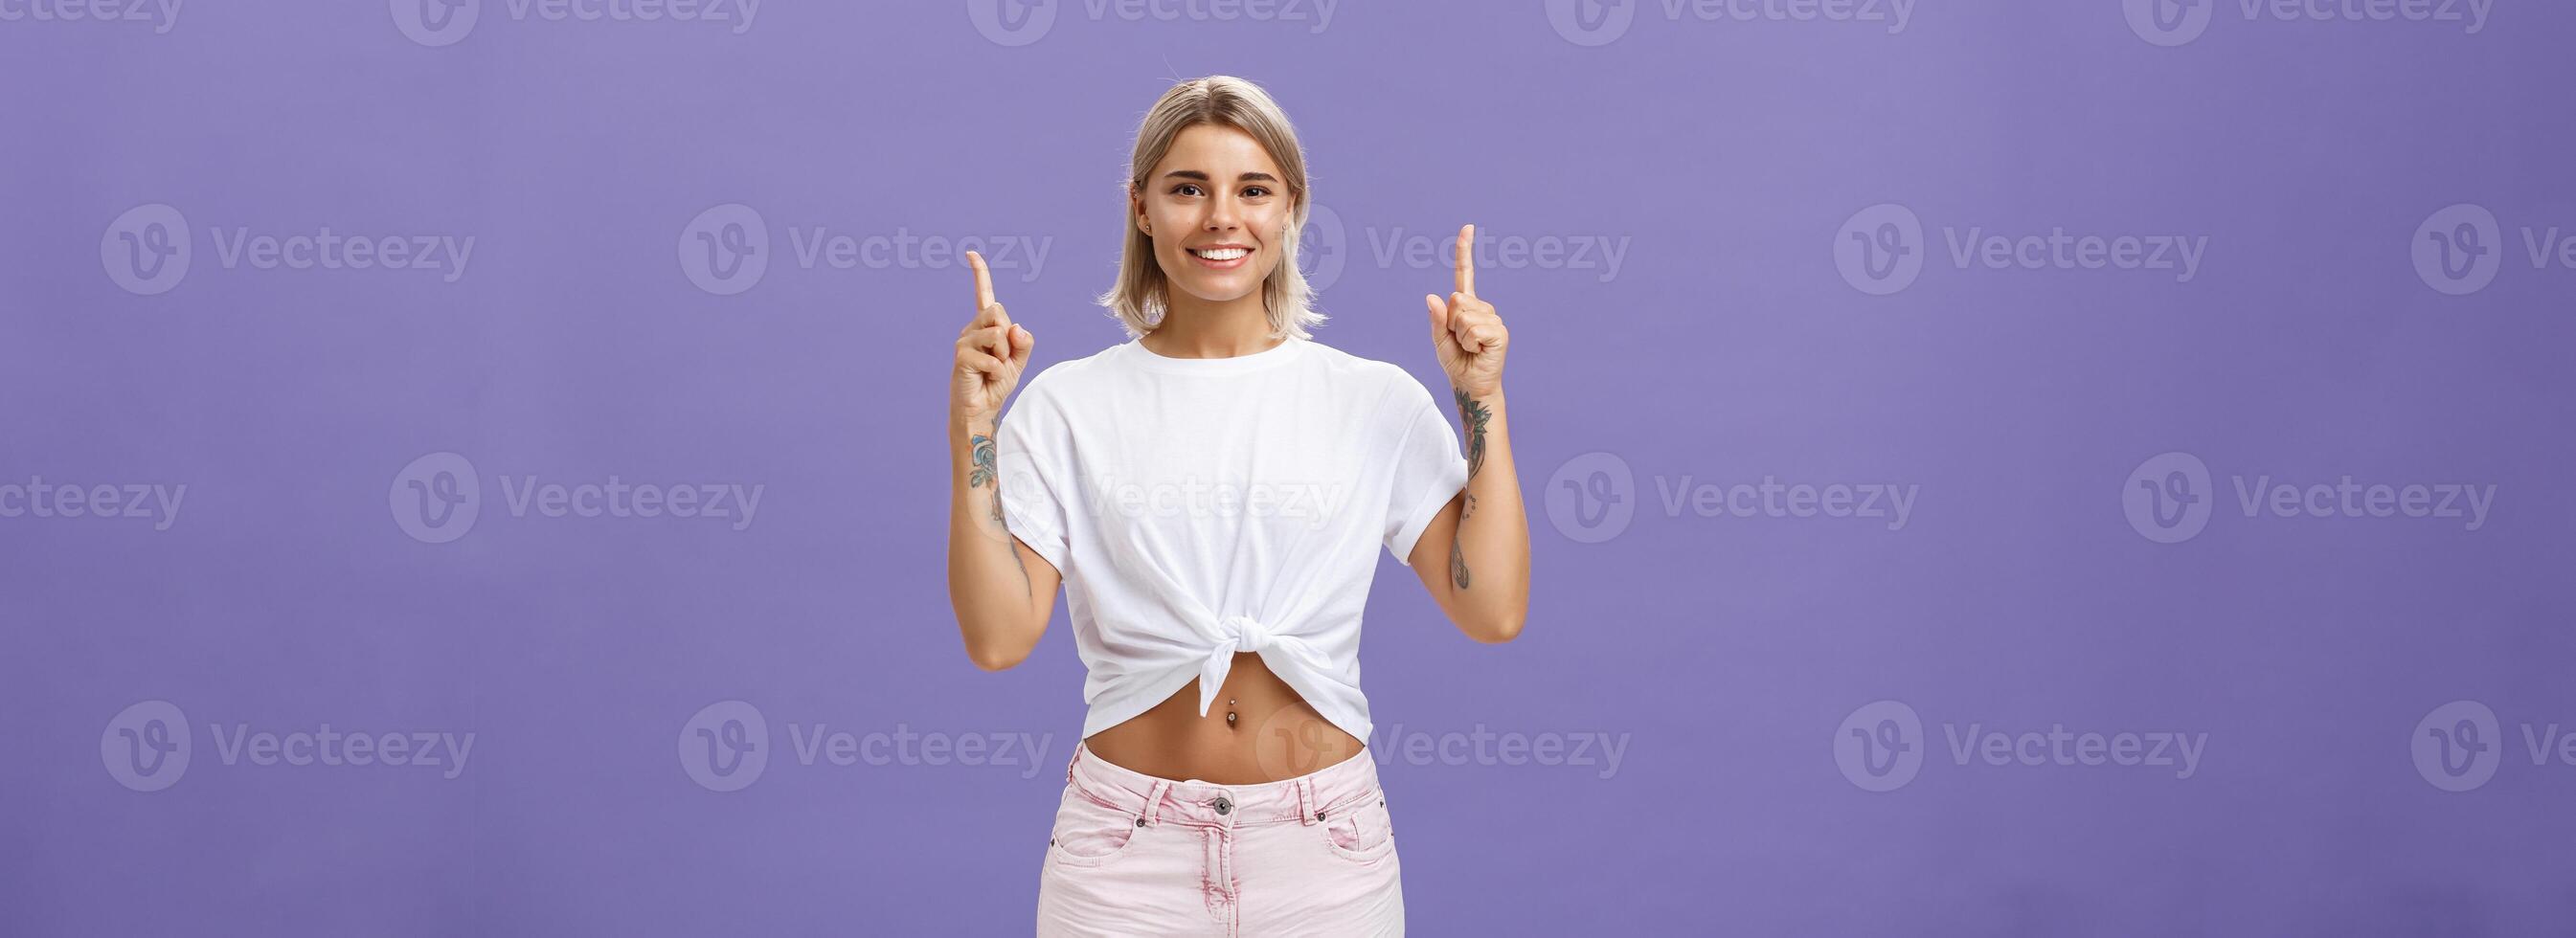 Time look upwards and move forward corporate ladder. Portrait of attractive ambitious and stylish young blonde woman with tattoos and pierced belly pointing up and smiling broadly over purple wall photo